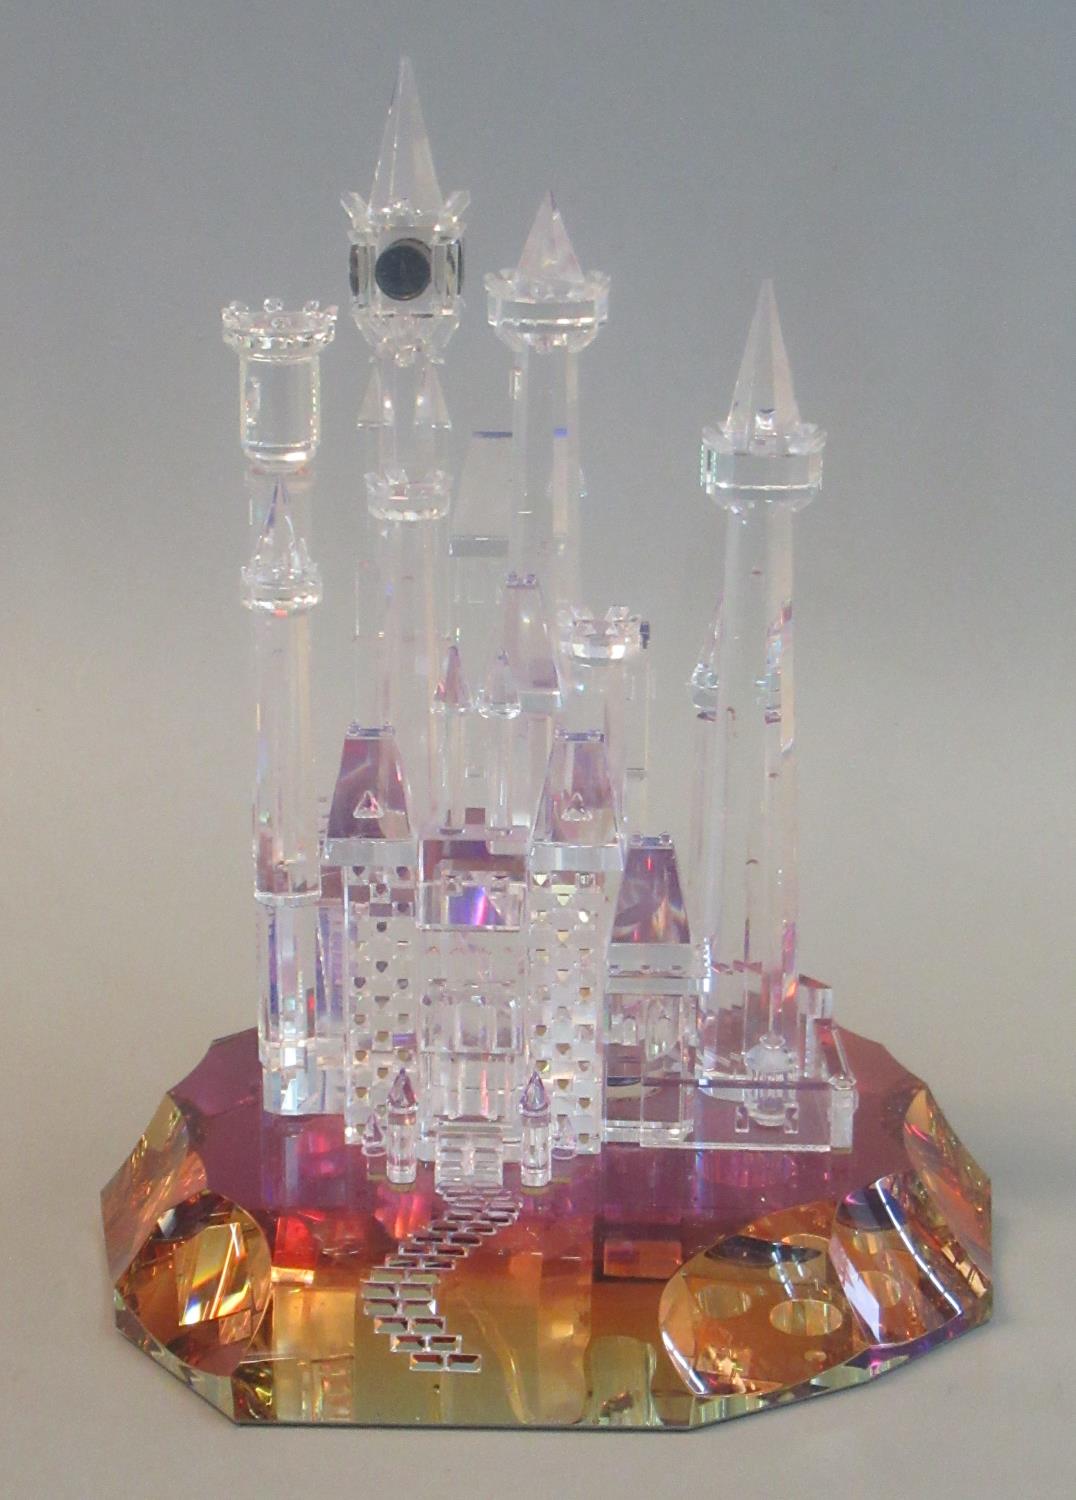 A Disney showcase collections crystal world crystal glass model of 'Cinderella's Castle'. 19cm